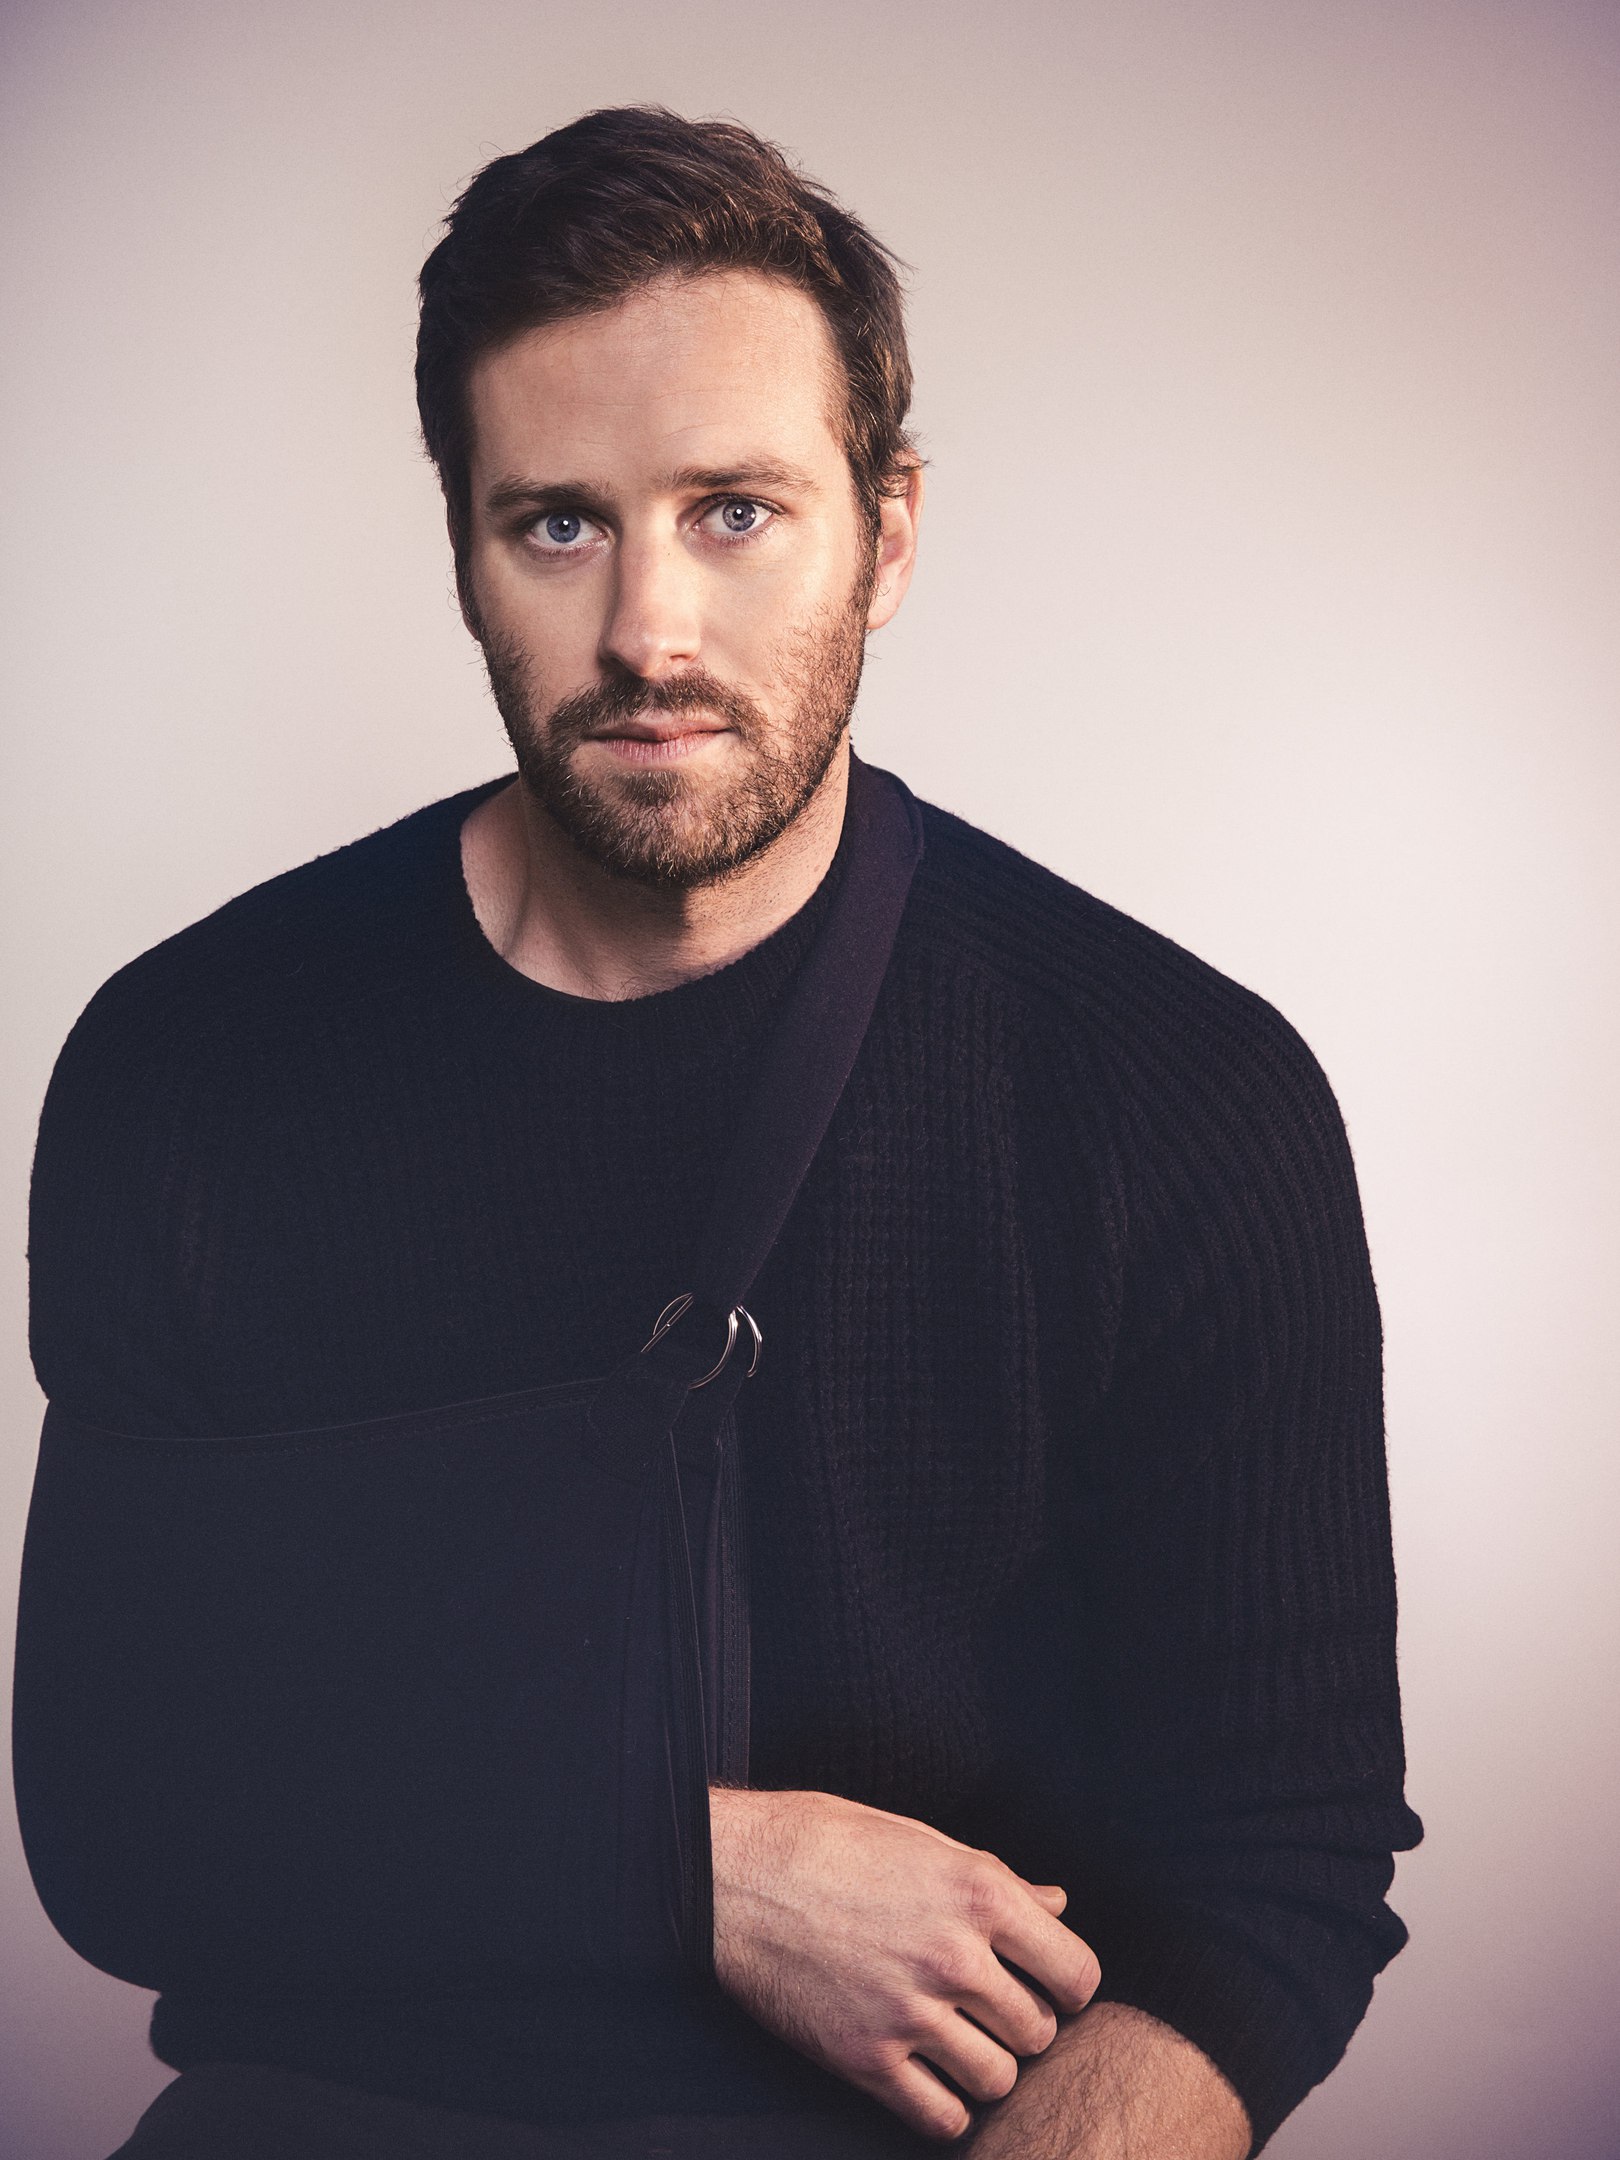 Armie Hammer photo 335 of 496 pics, wallpaper - photo #1309456 - ThePlace2